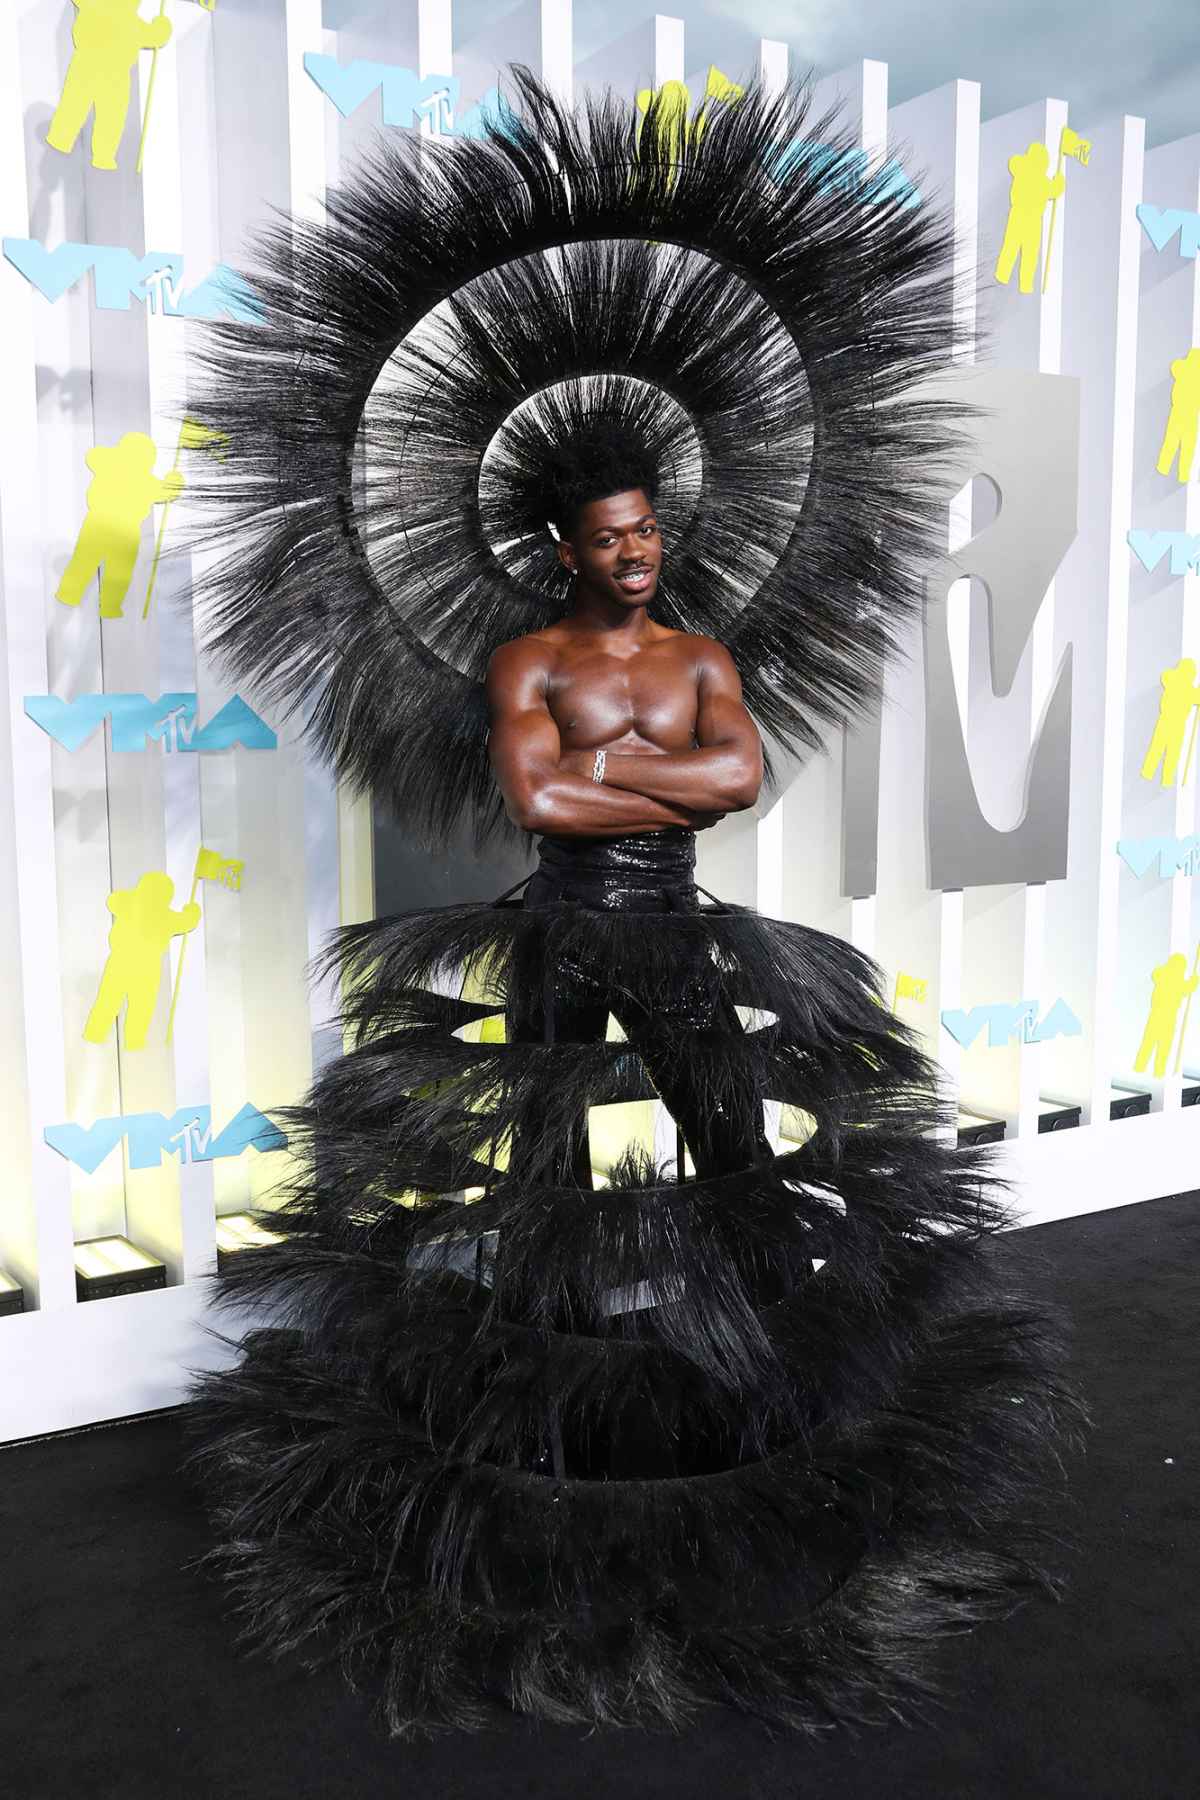 VMAS 2022: Lil Nas X Harris Reed Outfit, Headpiece Details